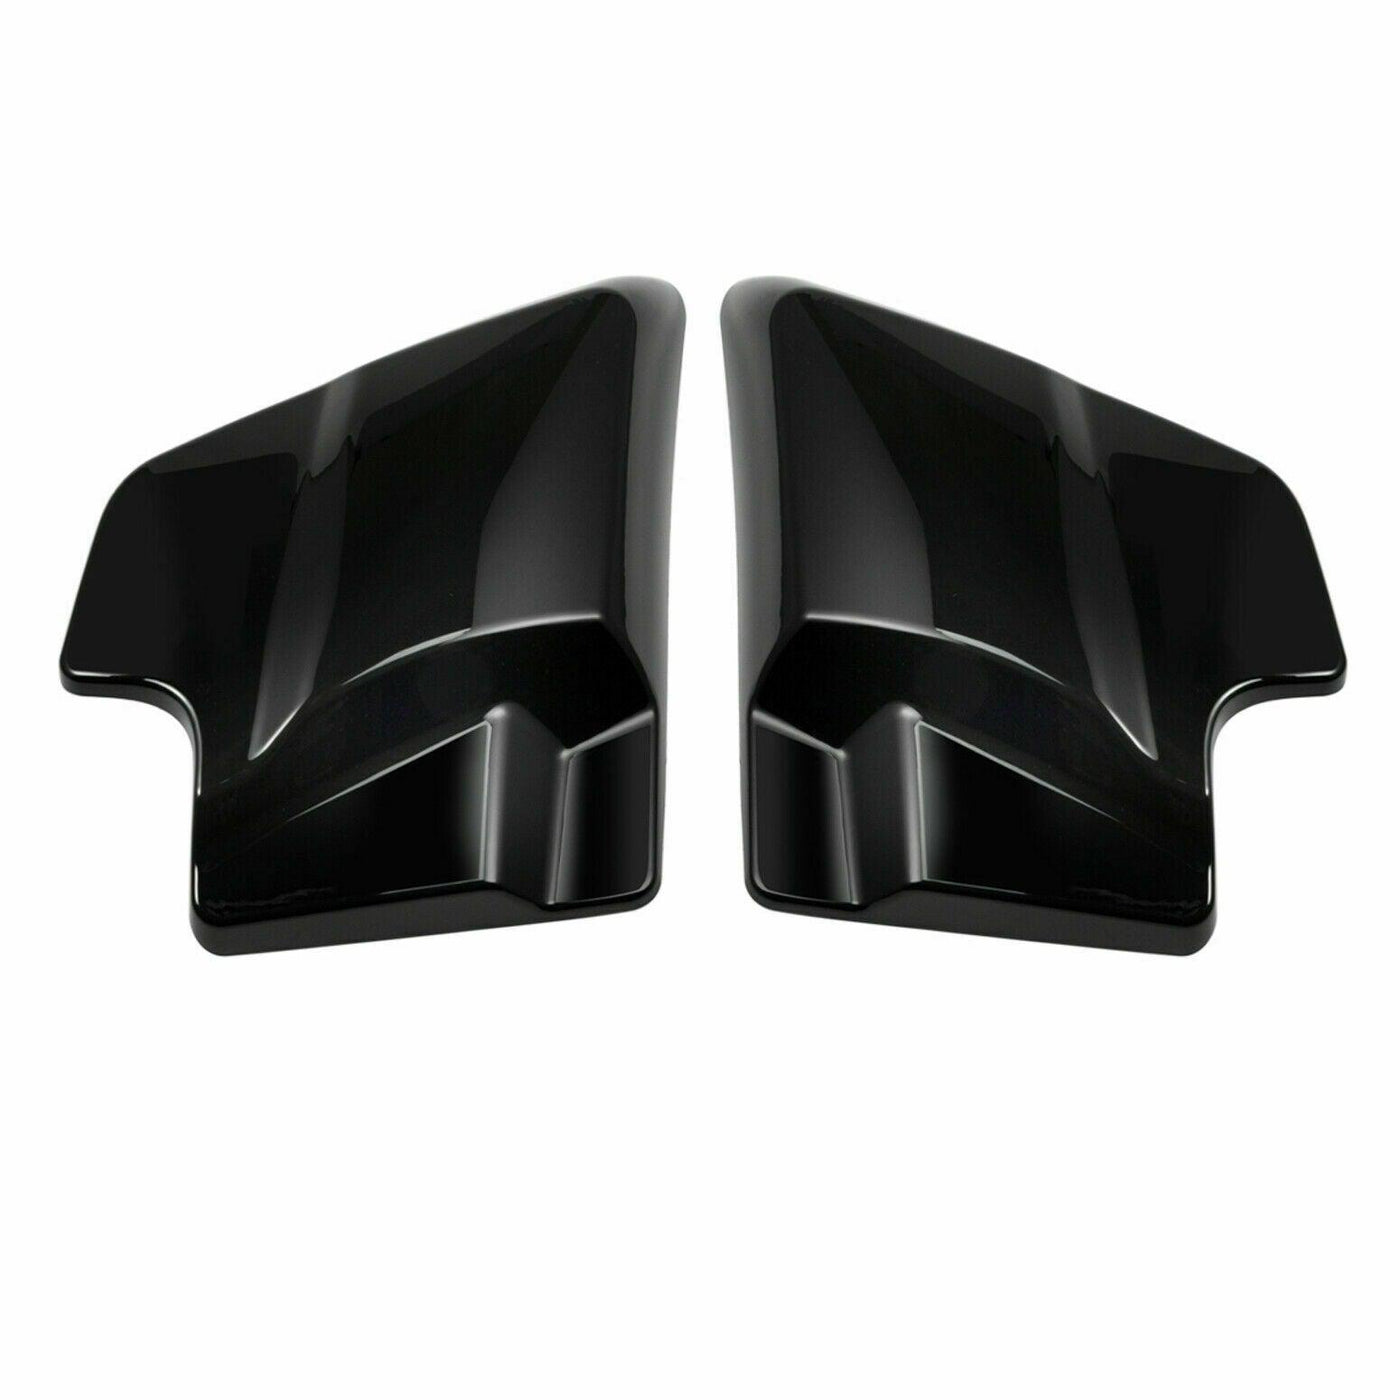 Black Stretched Side Covers Fit for Harley Touring Electra Road Glide 2009-Later - Moto Life Products